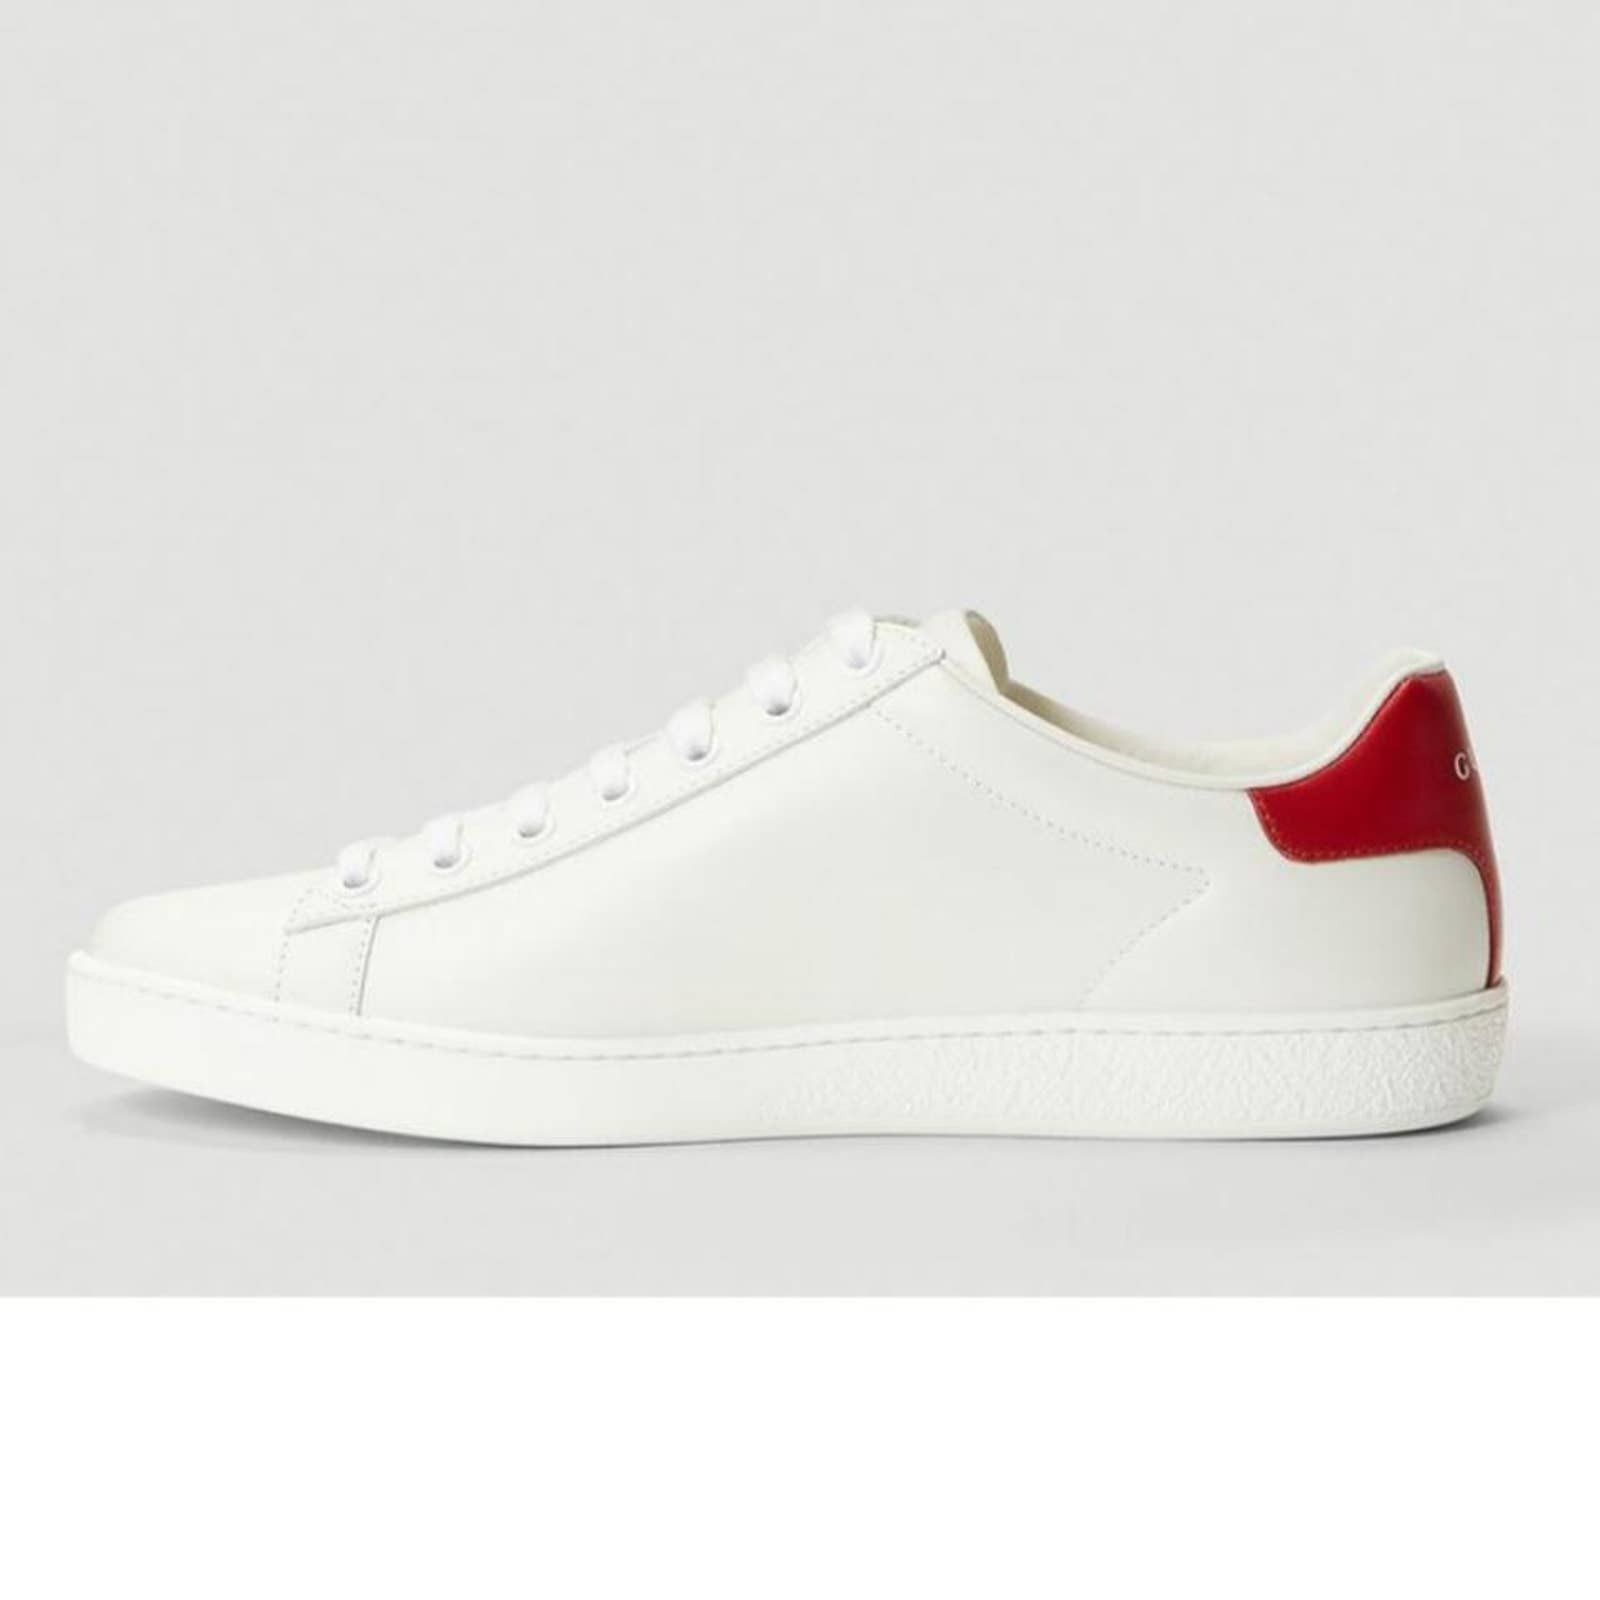 Gucci Ace sneakers with interlocking G logo perforated Size US 6.5 / IT 36.5 - 2 Preview